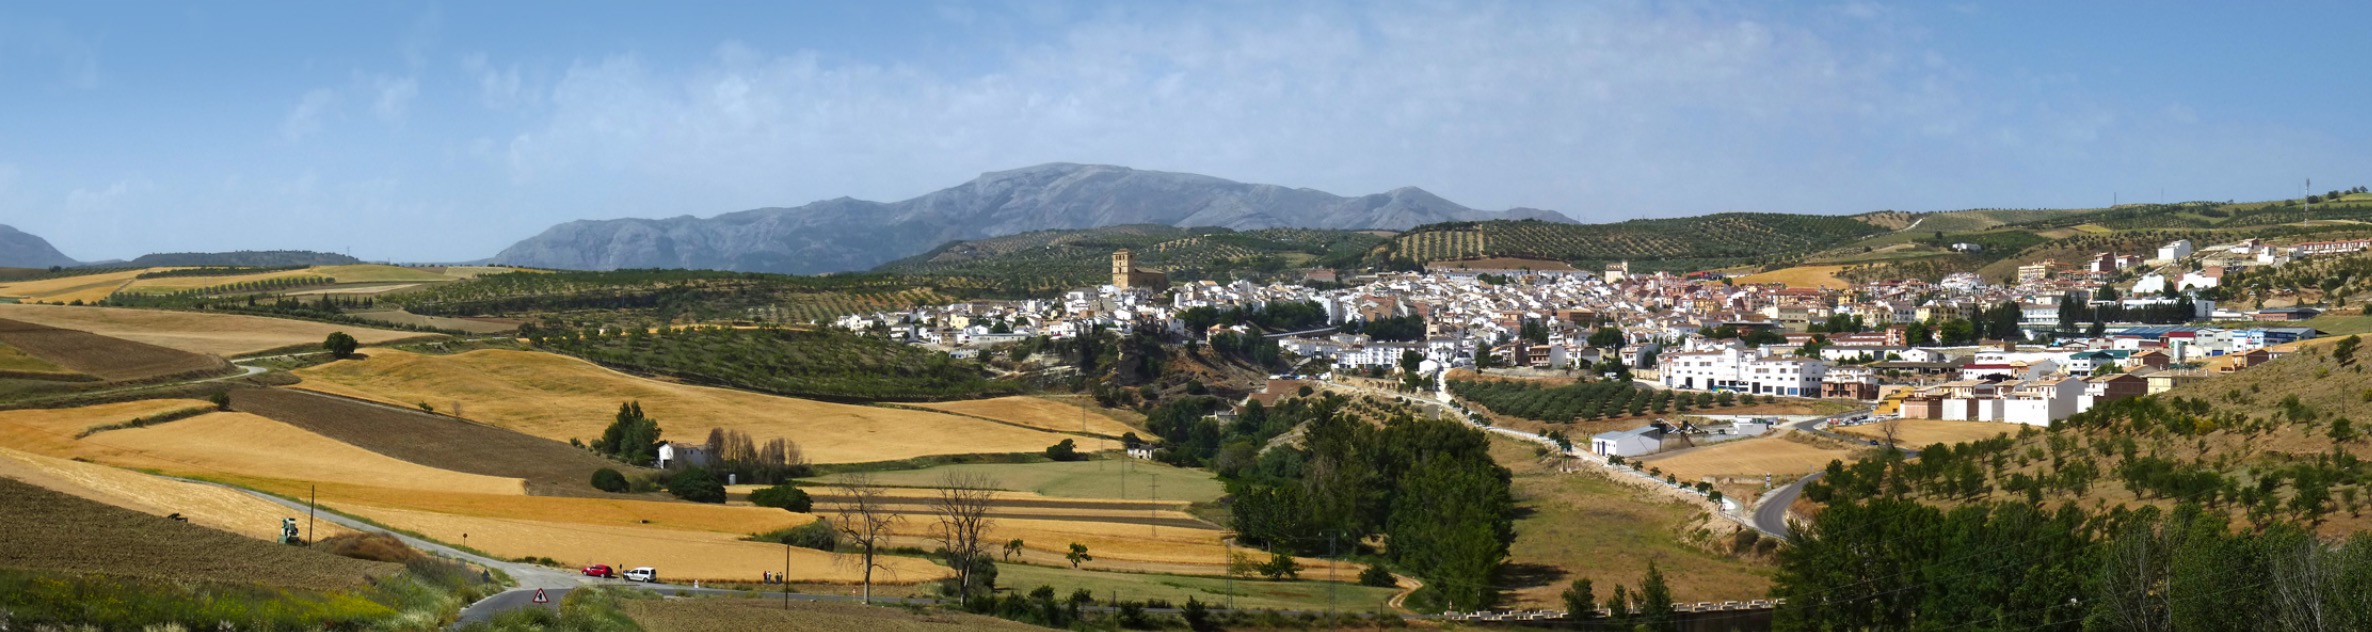 The town of Alhama in Granada, Spain